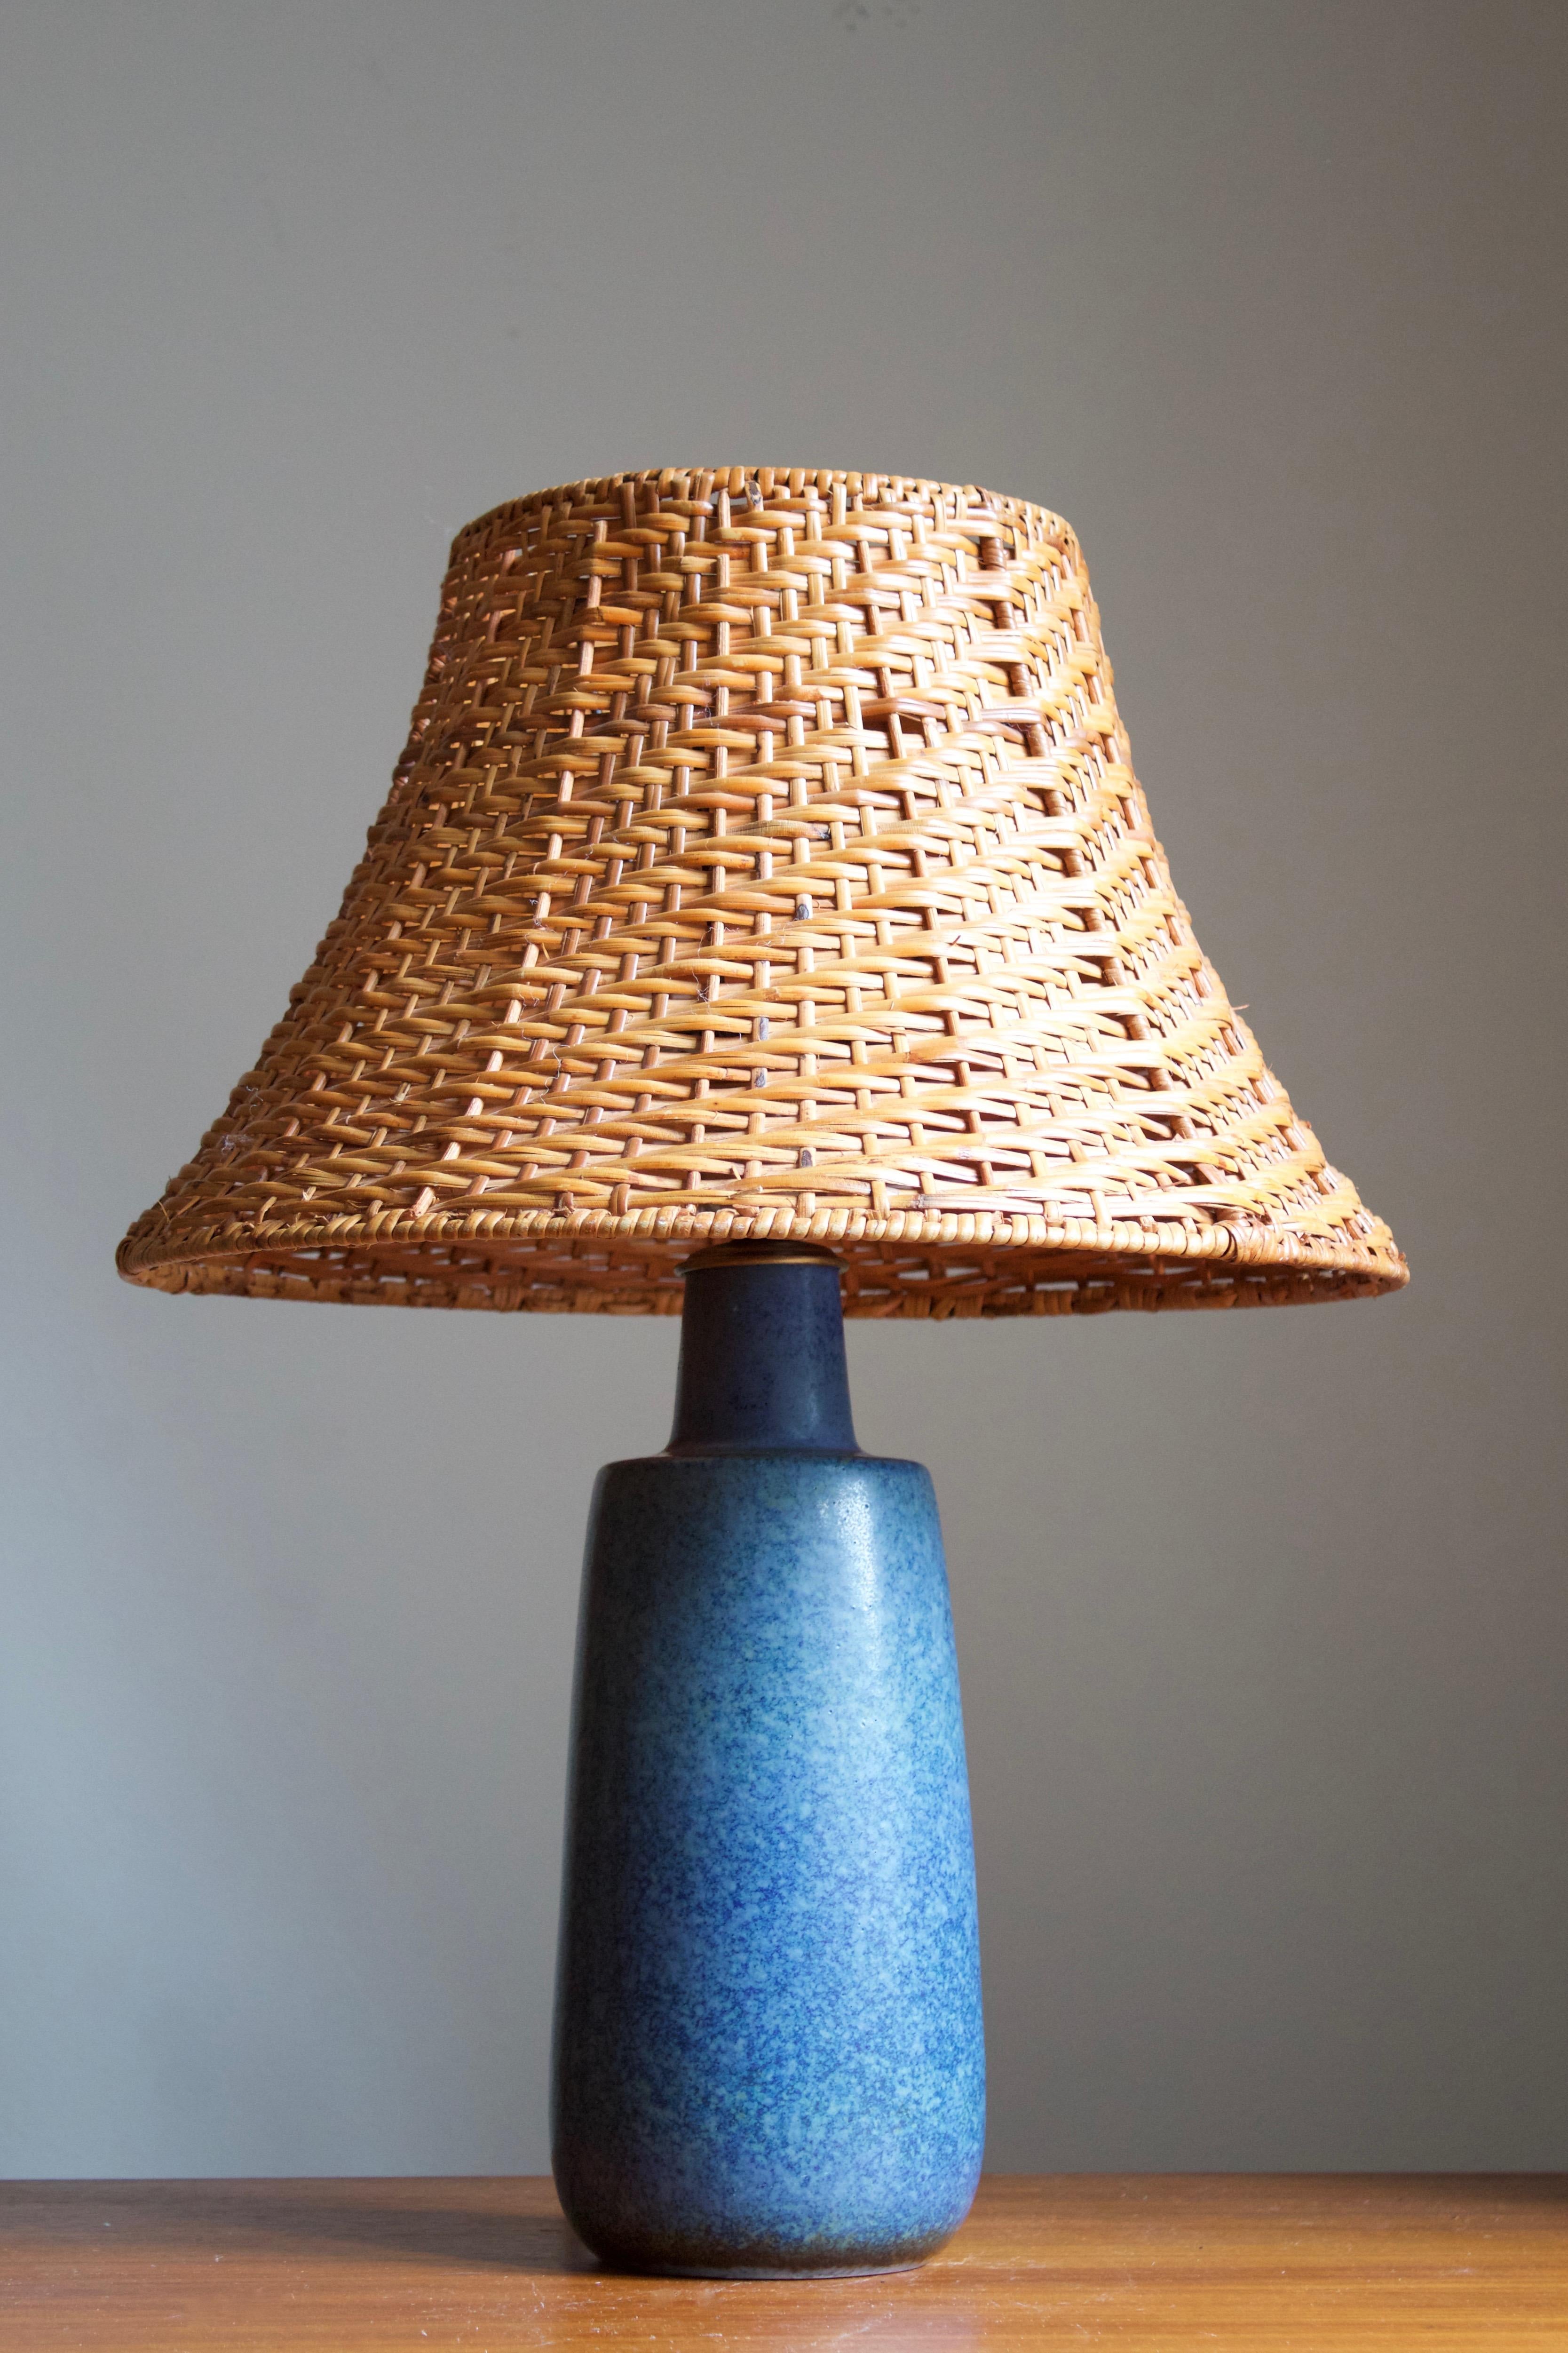 A table lamp by Carl-Harry Stålhane for the iconic Swedish firm Rörstrand. 

Stated dimensions exclude lampshades. Height includes socket. Lampshade illustrated can be included in purchase upon request.

Glaze features a blue color.

Other